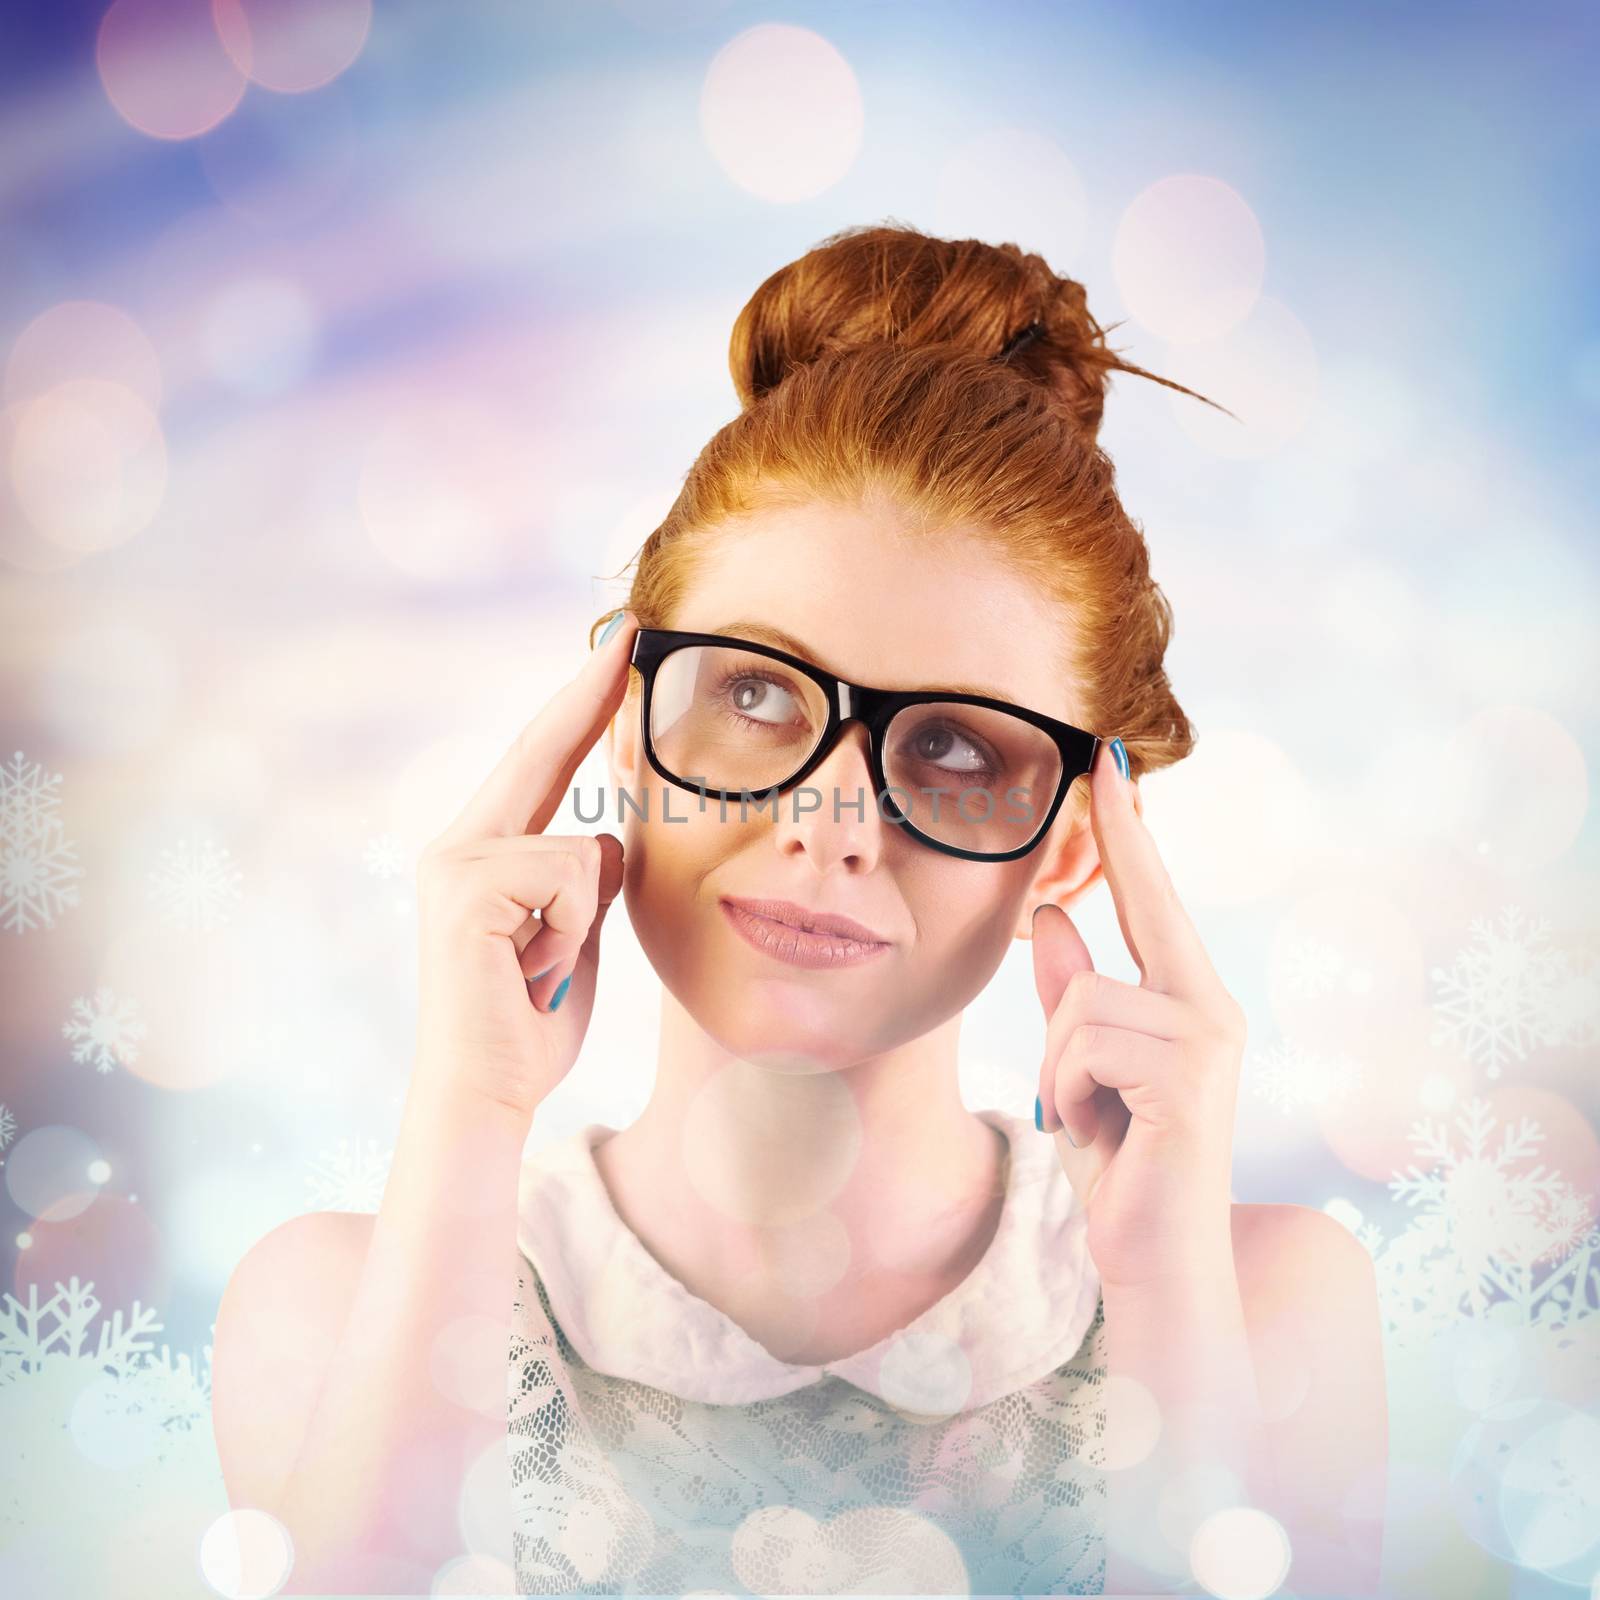 Hipster redhead looking up thinking against snowflake pattern